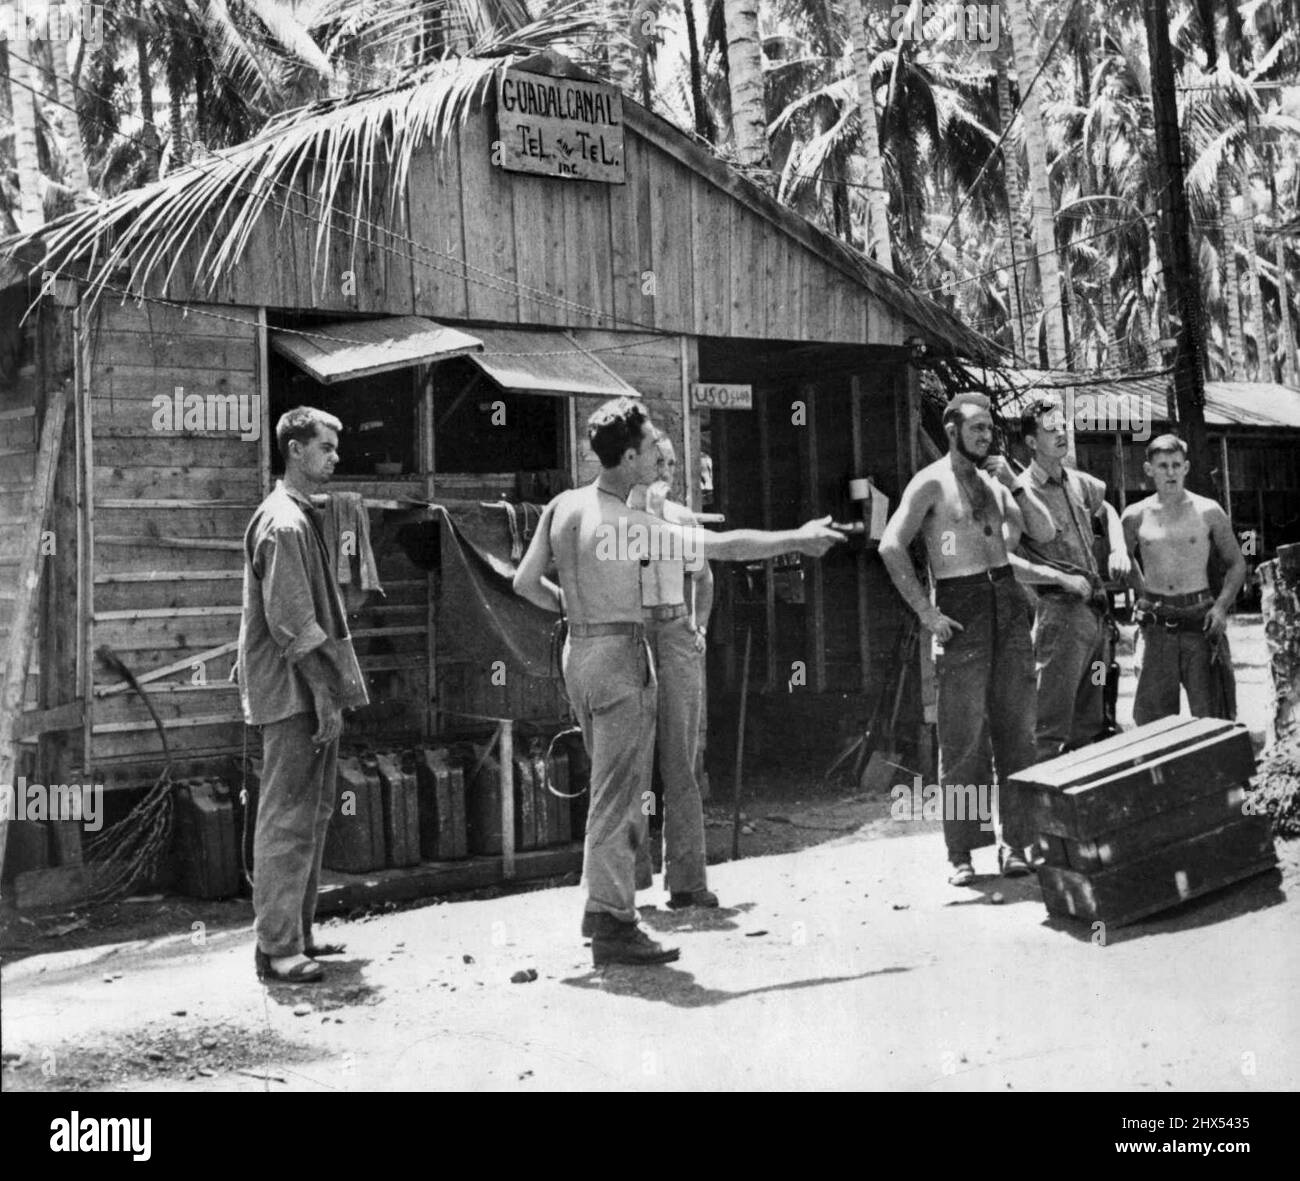 Marines' Communications Center At Base On Guadalcanal Island -- In this picture from the fighting front on Guadalcanal a group U.S. Marines are seen outside the telephone building, communications Headquarters for a unit of the American forces on the island. November 23, 1942. Stock Photo